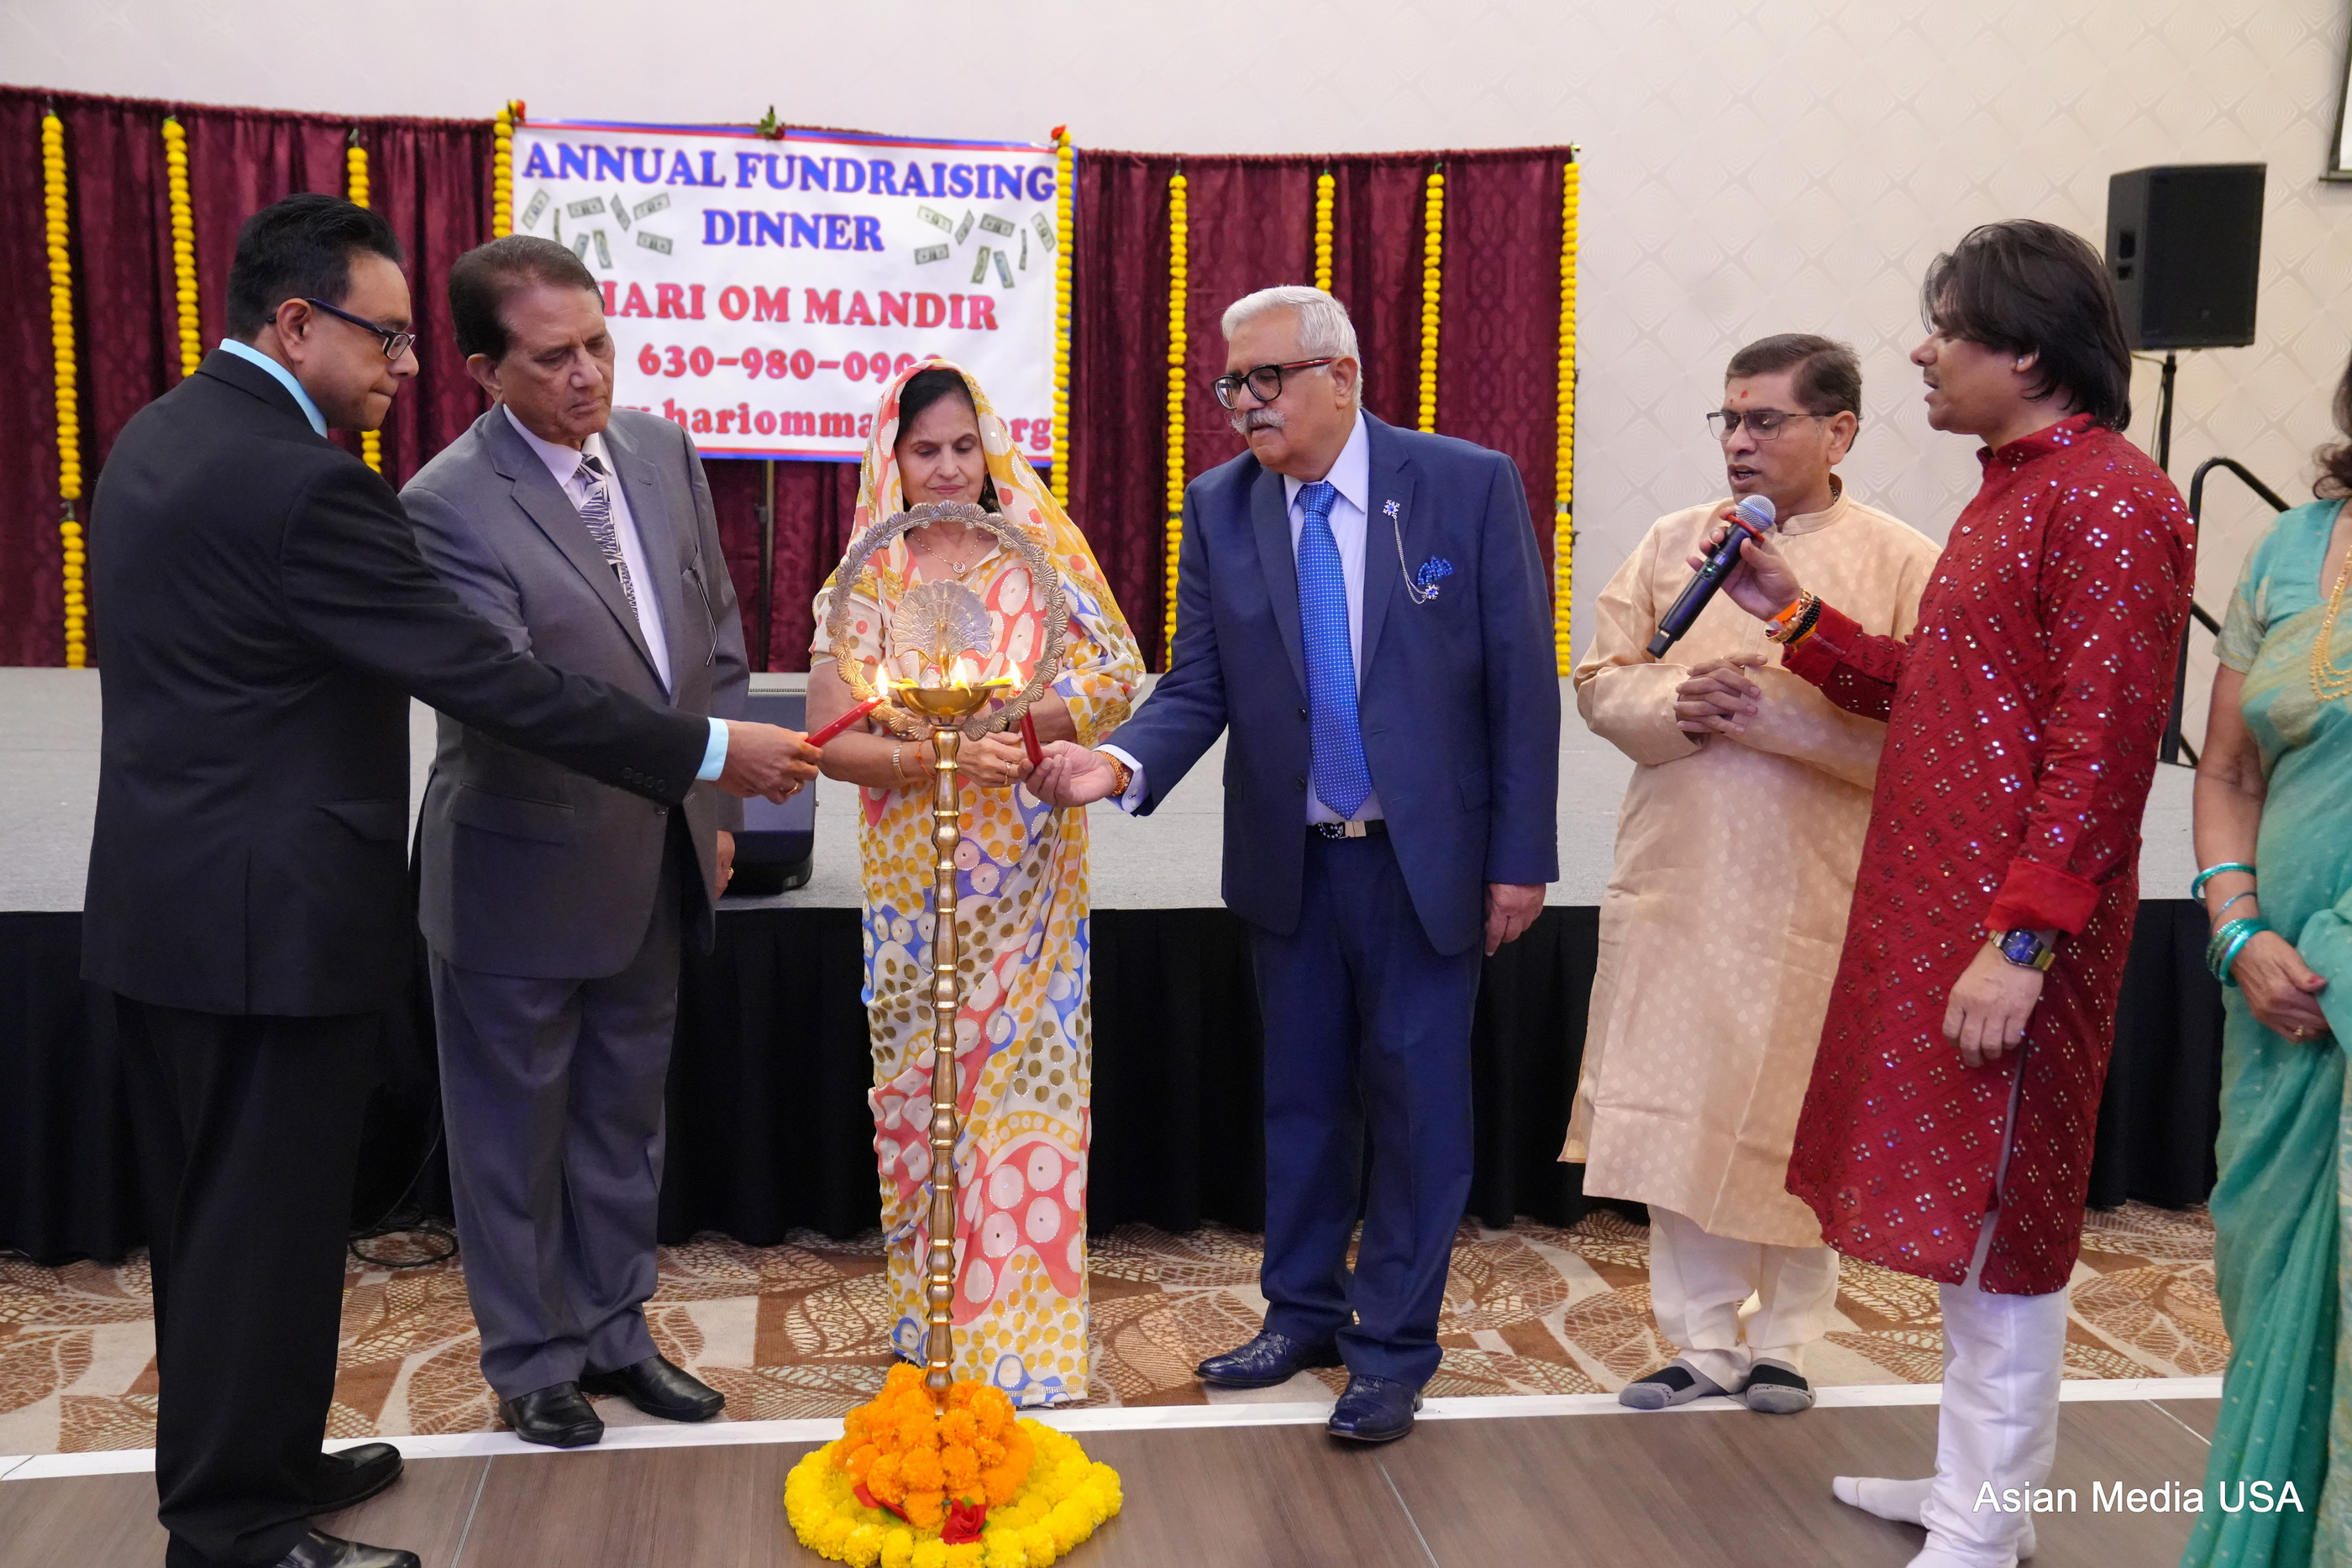 Hari Om Mandir hosts annual fund-raiser dinner for community services, growth and future expansion projects